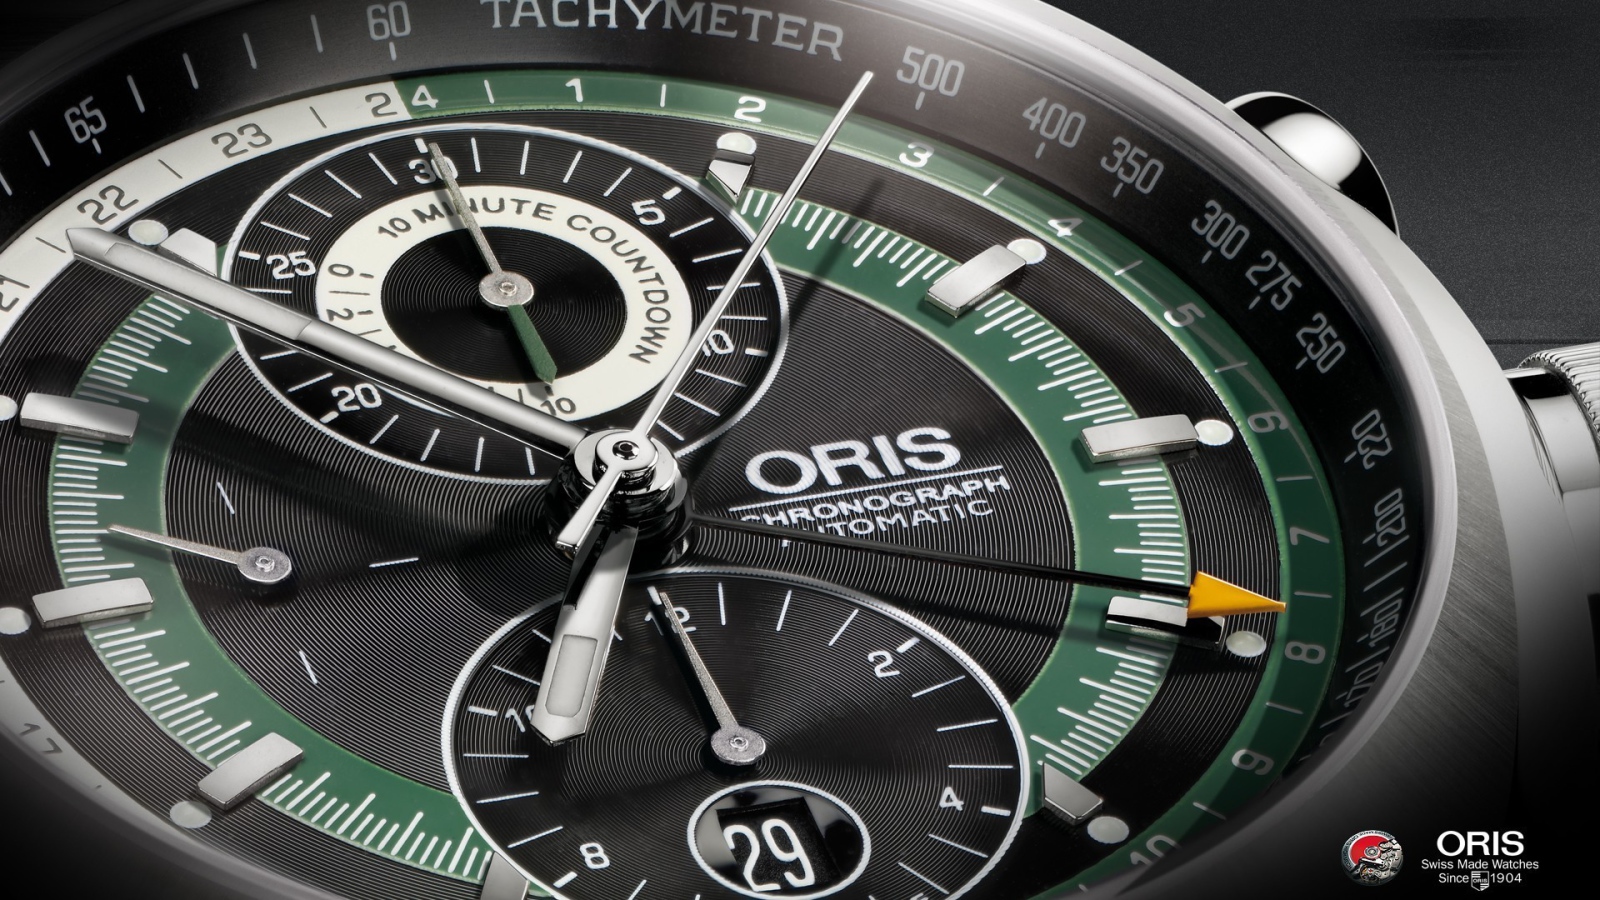 Luxury watches from the Oris company